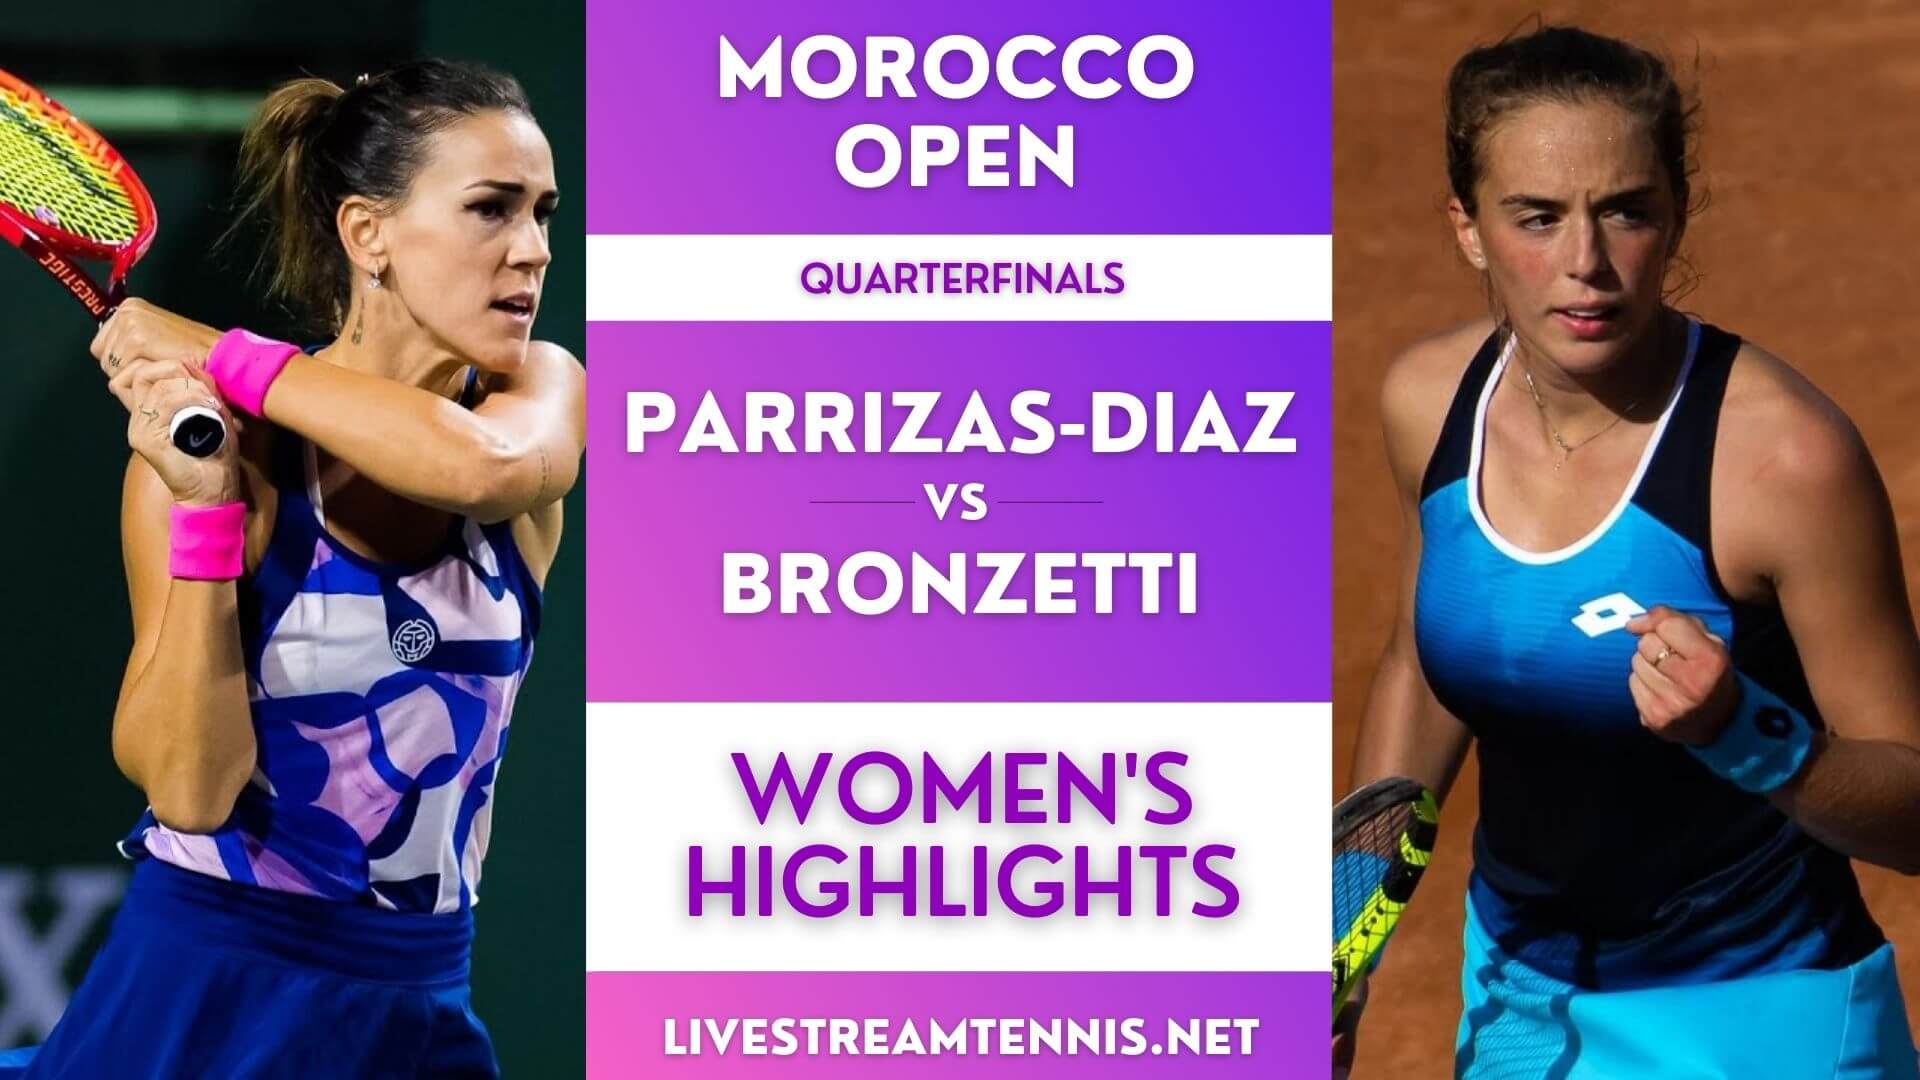 Morocco Open Ladies Quarterfinal 1 Highlights 2022